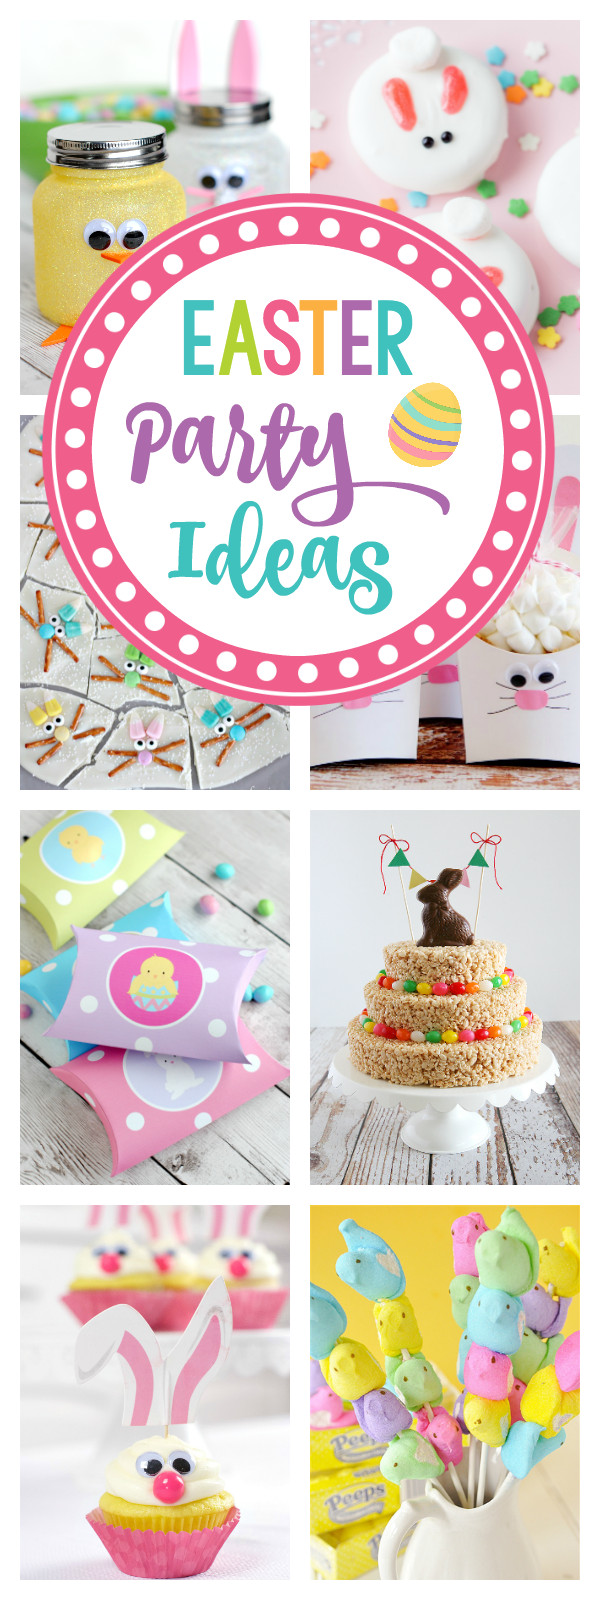 Fun Ideas For Easter
 25 Fun Easter Party Ideas for Kids – Fun Squared